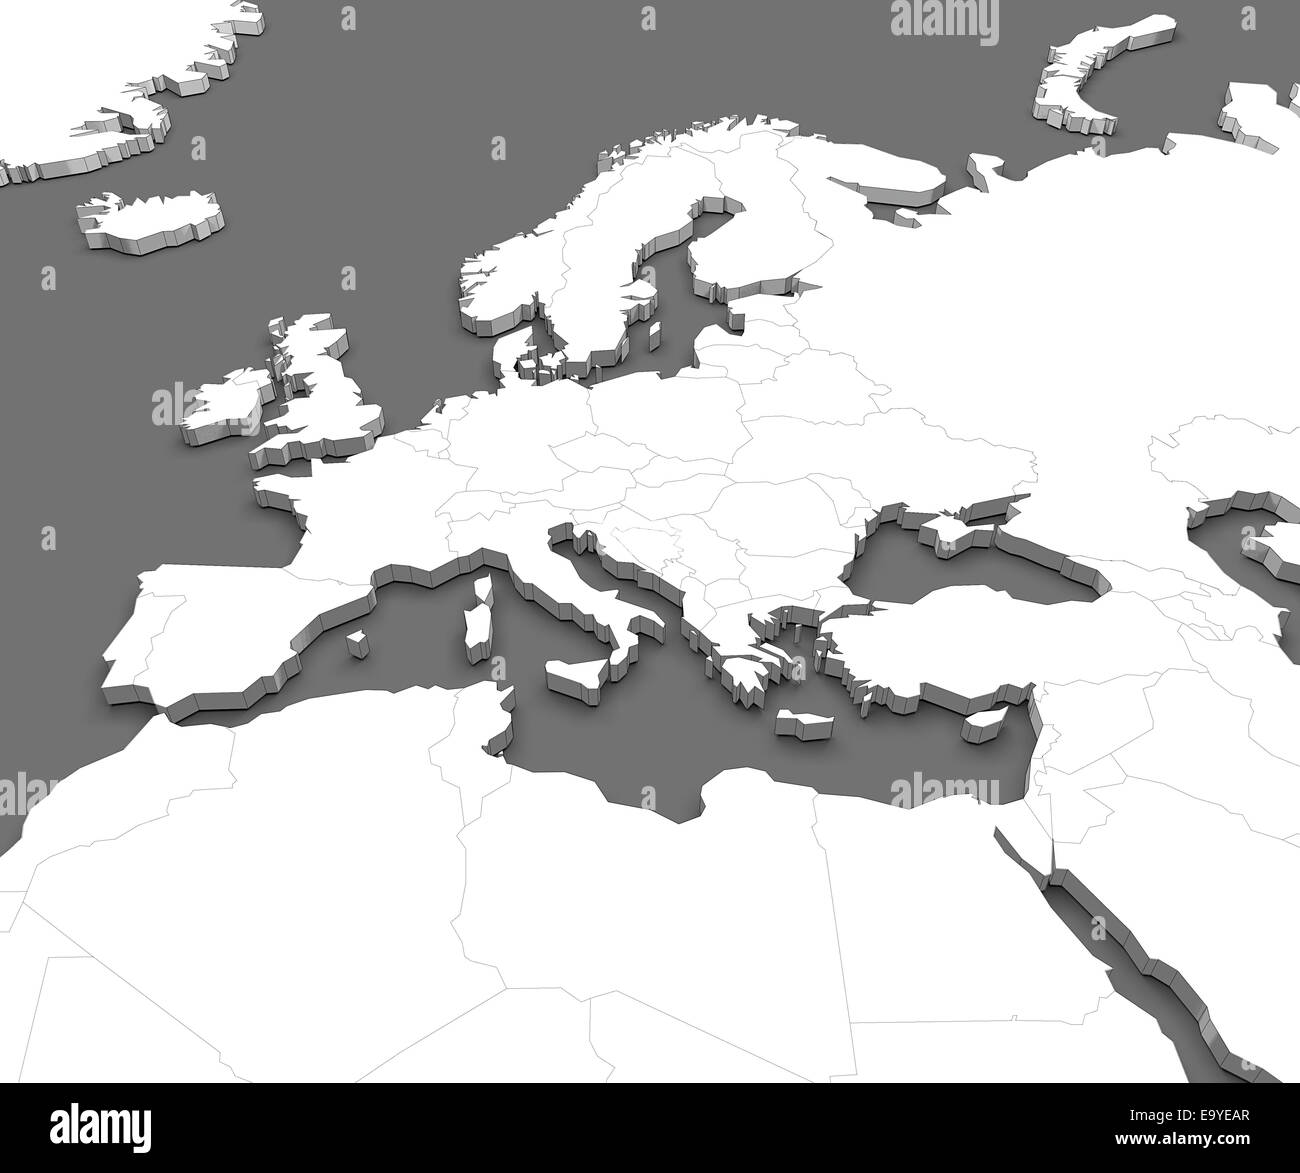 Map of Europe and North Africa Stock Photo